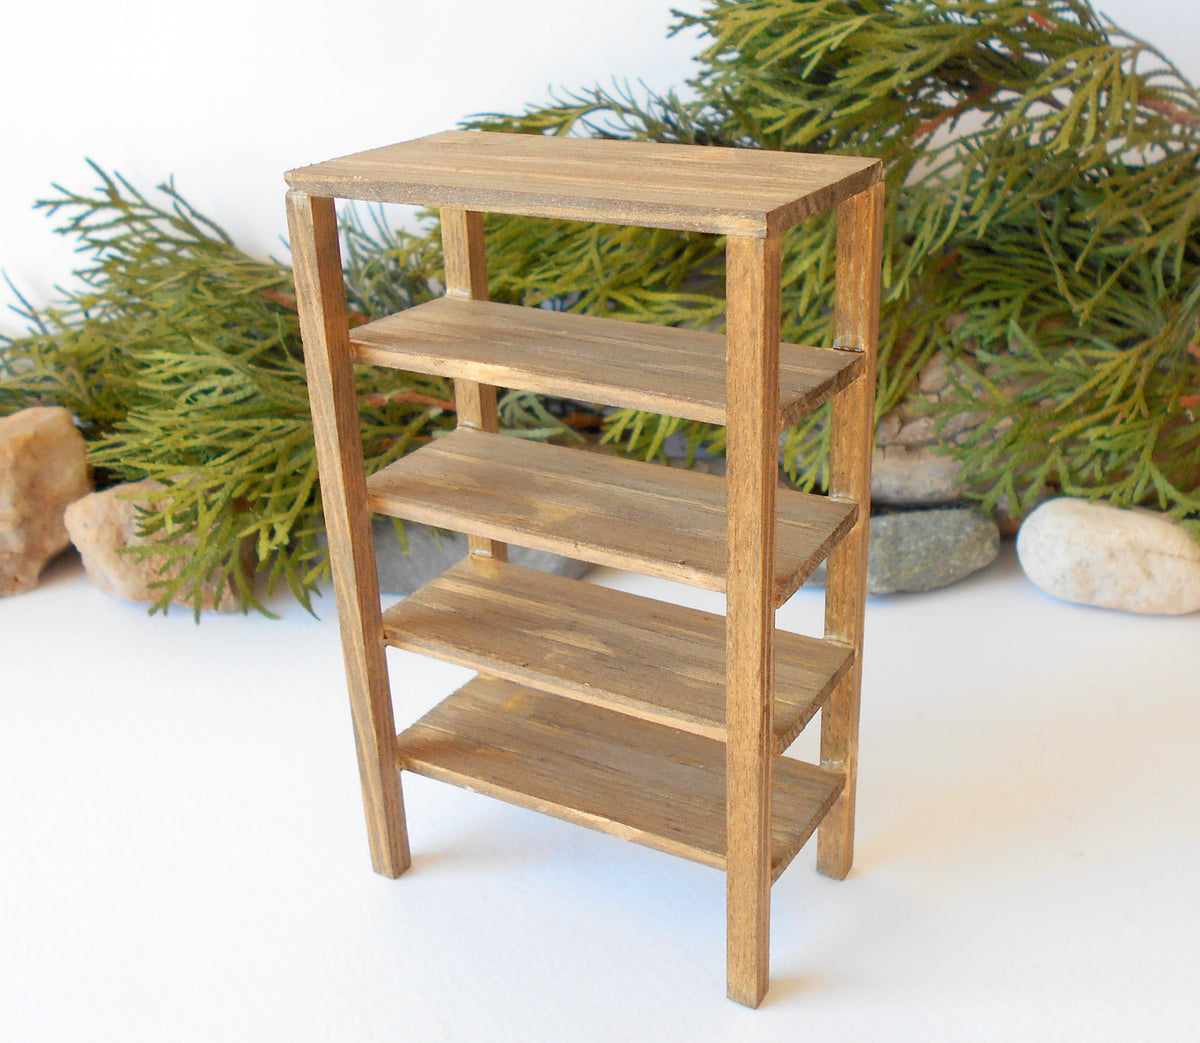 This is a Miniature shelf of wooden furniture that is approximately 1/12 in scale&lt;strong&gt;. &lt;/strong&gt;I have stained the shelf with light brown Italian eco-friendly mordant.&amp;nbsp;